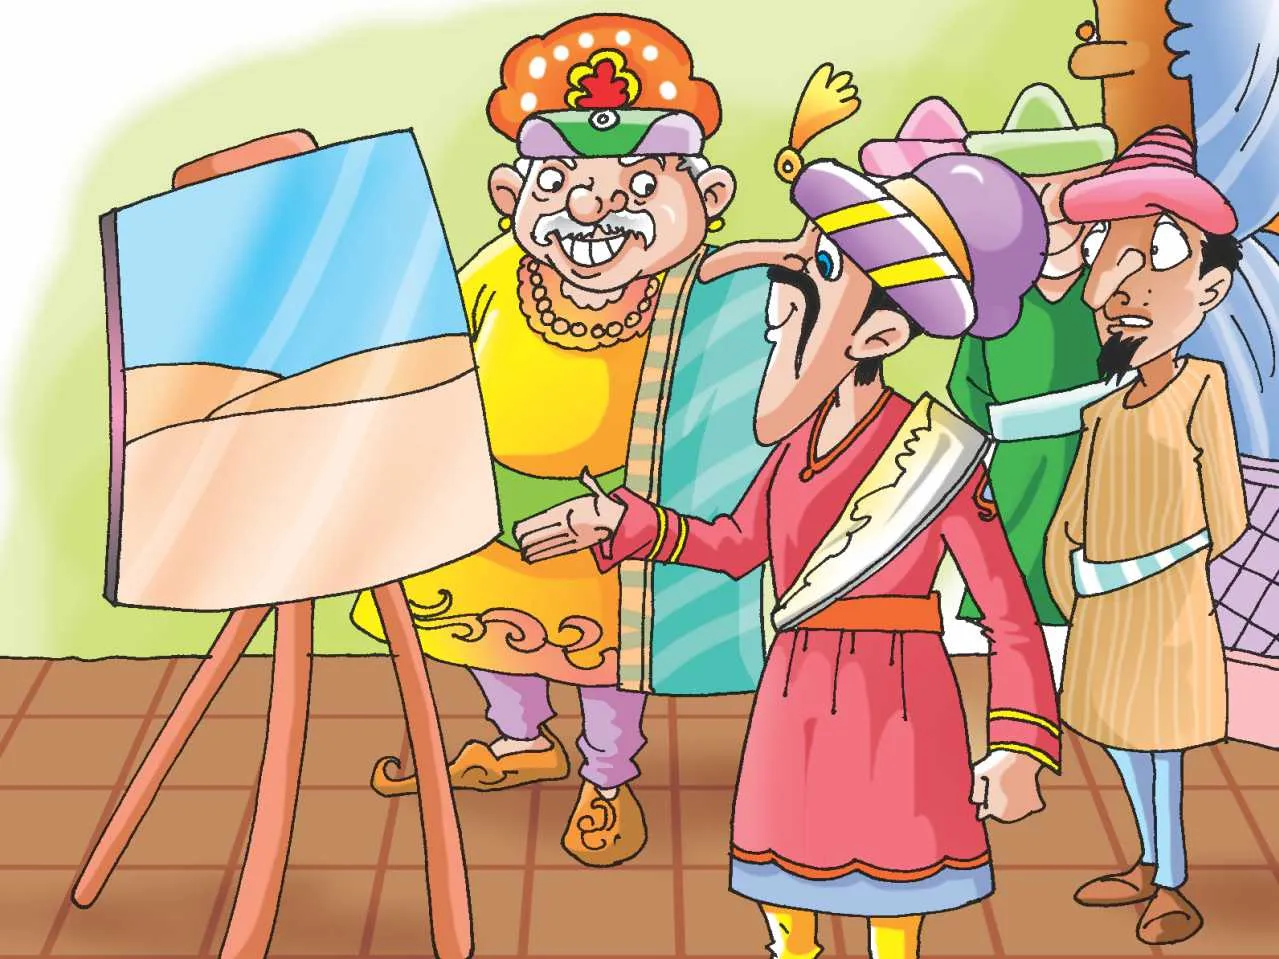 212 - Akbar-Birbal - Birbal's Execution - Stories From India (podcast) |  Listen Notes